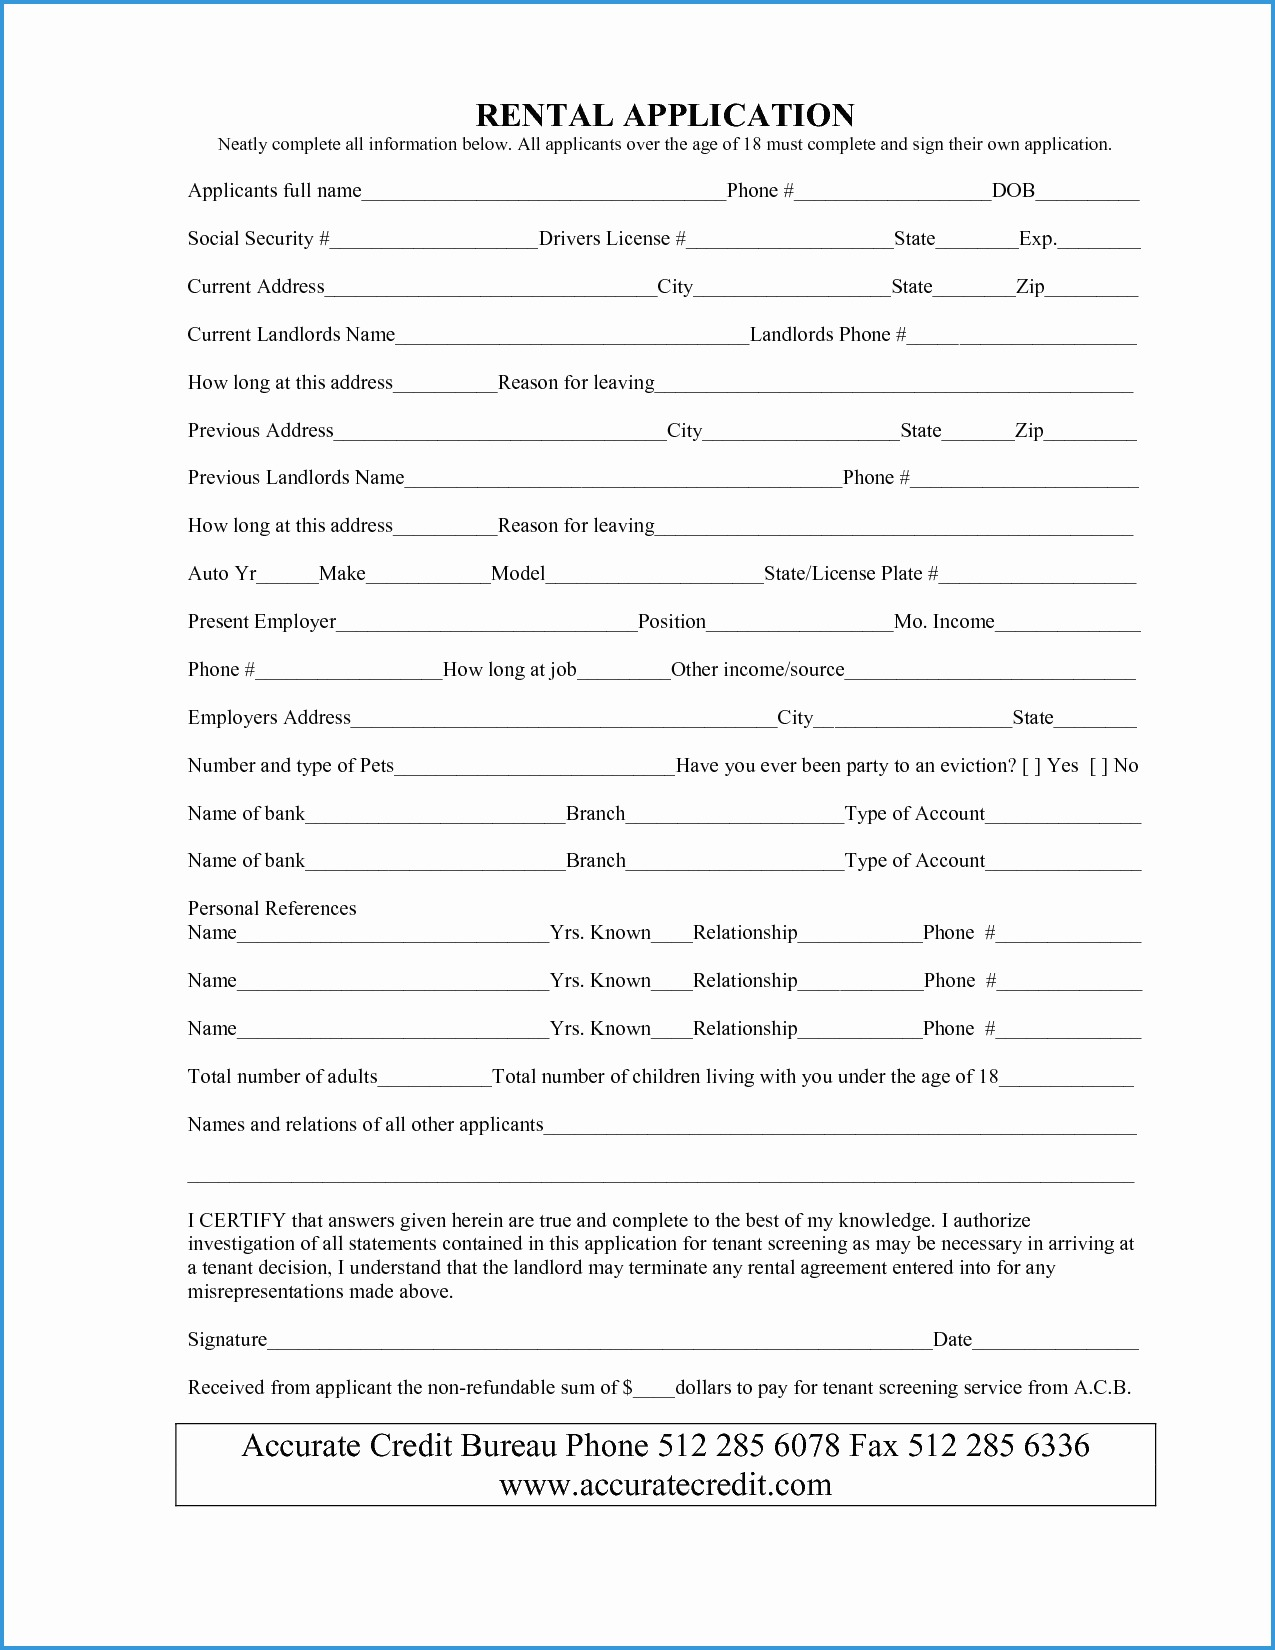 Room Rental Agreement Form Free Simple Rental Agreement Template Great 10 Best Of Basic Room